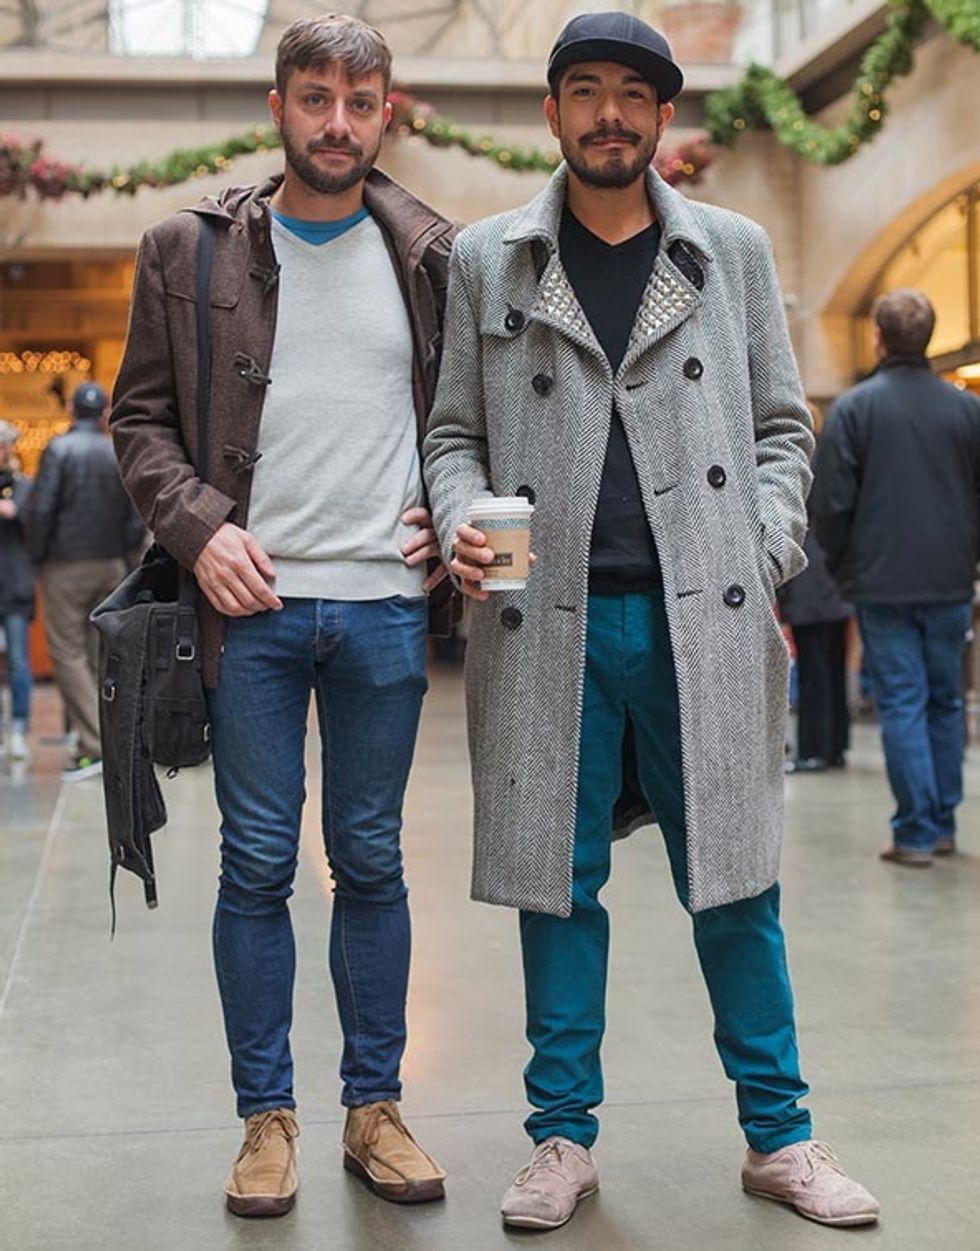 Street Style Report: Foreign Style at the Ferry Building